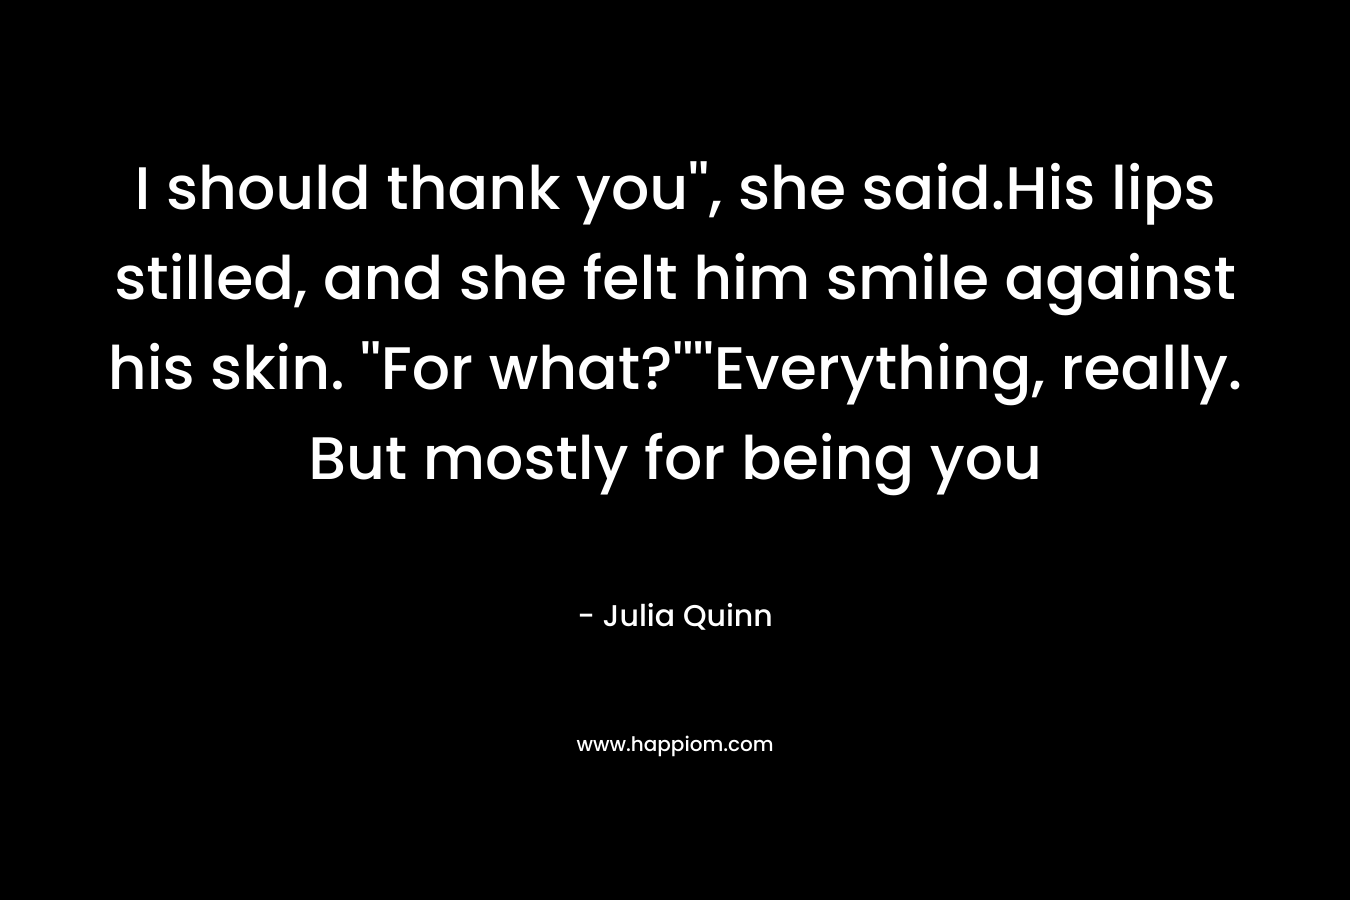 I should thank you”, she said.His lips stilled, and she felt him smile against his skin. ”For what?””Everything, really. But mostly for being you – Julia Quinn